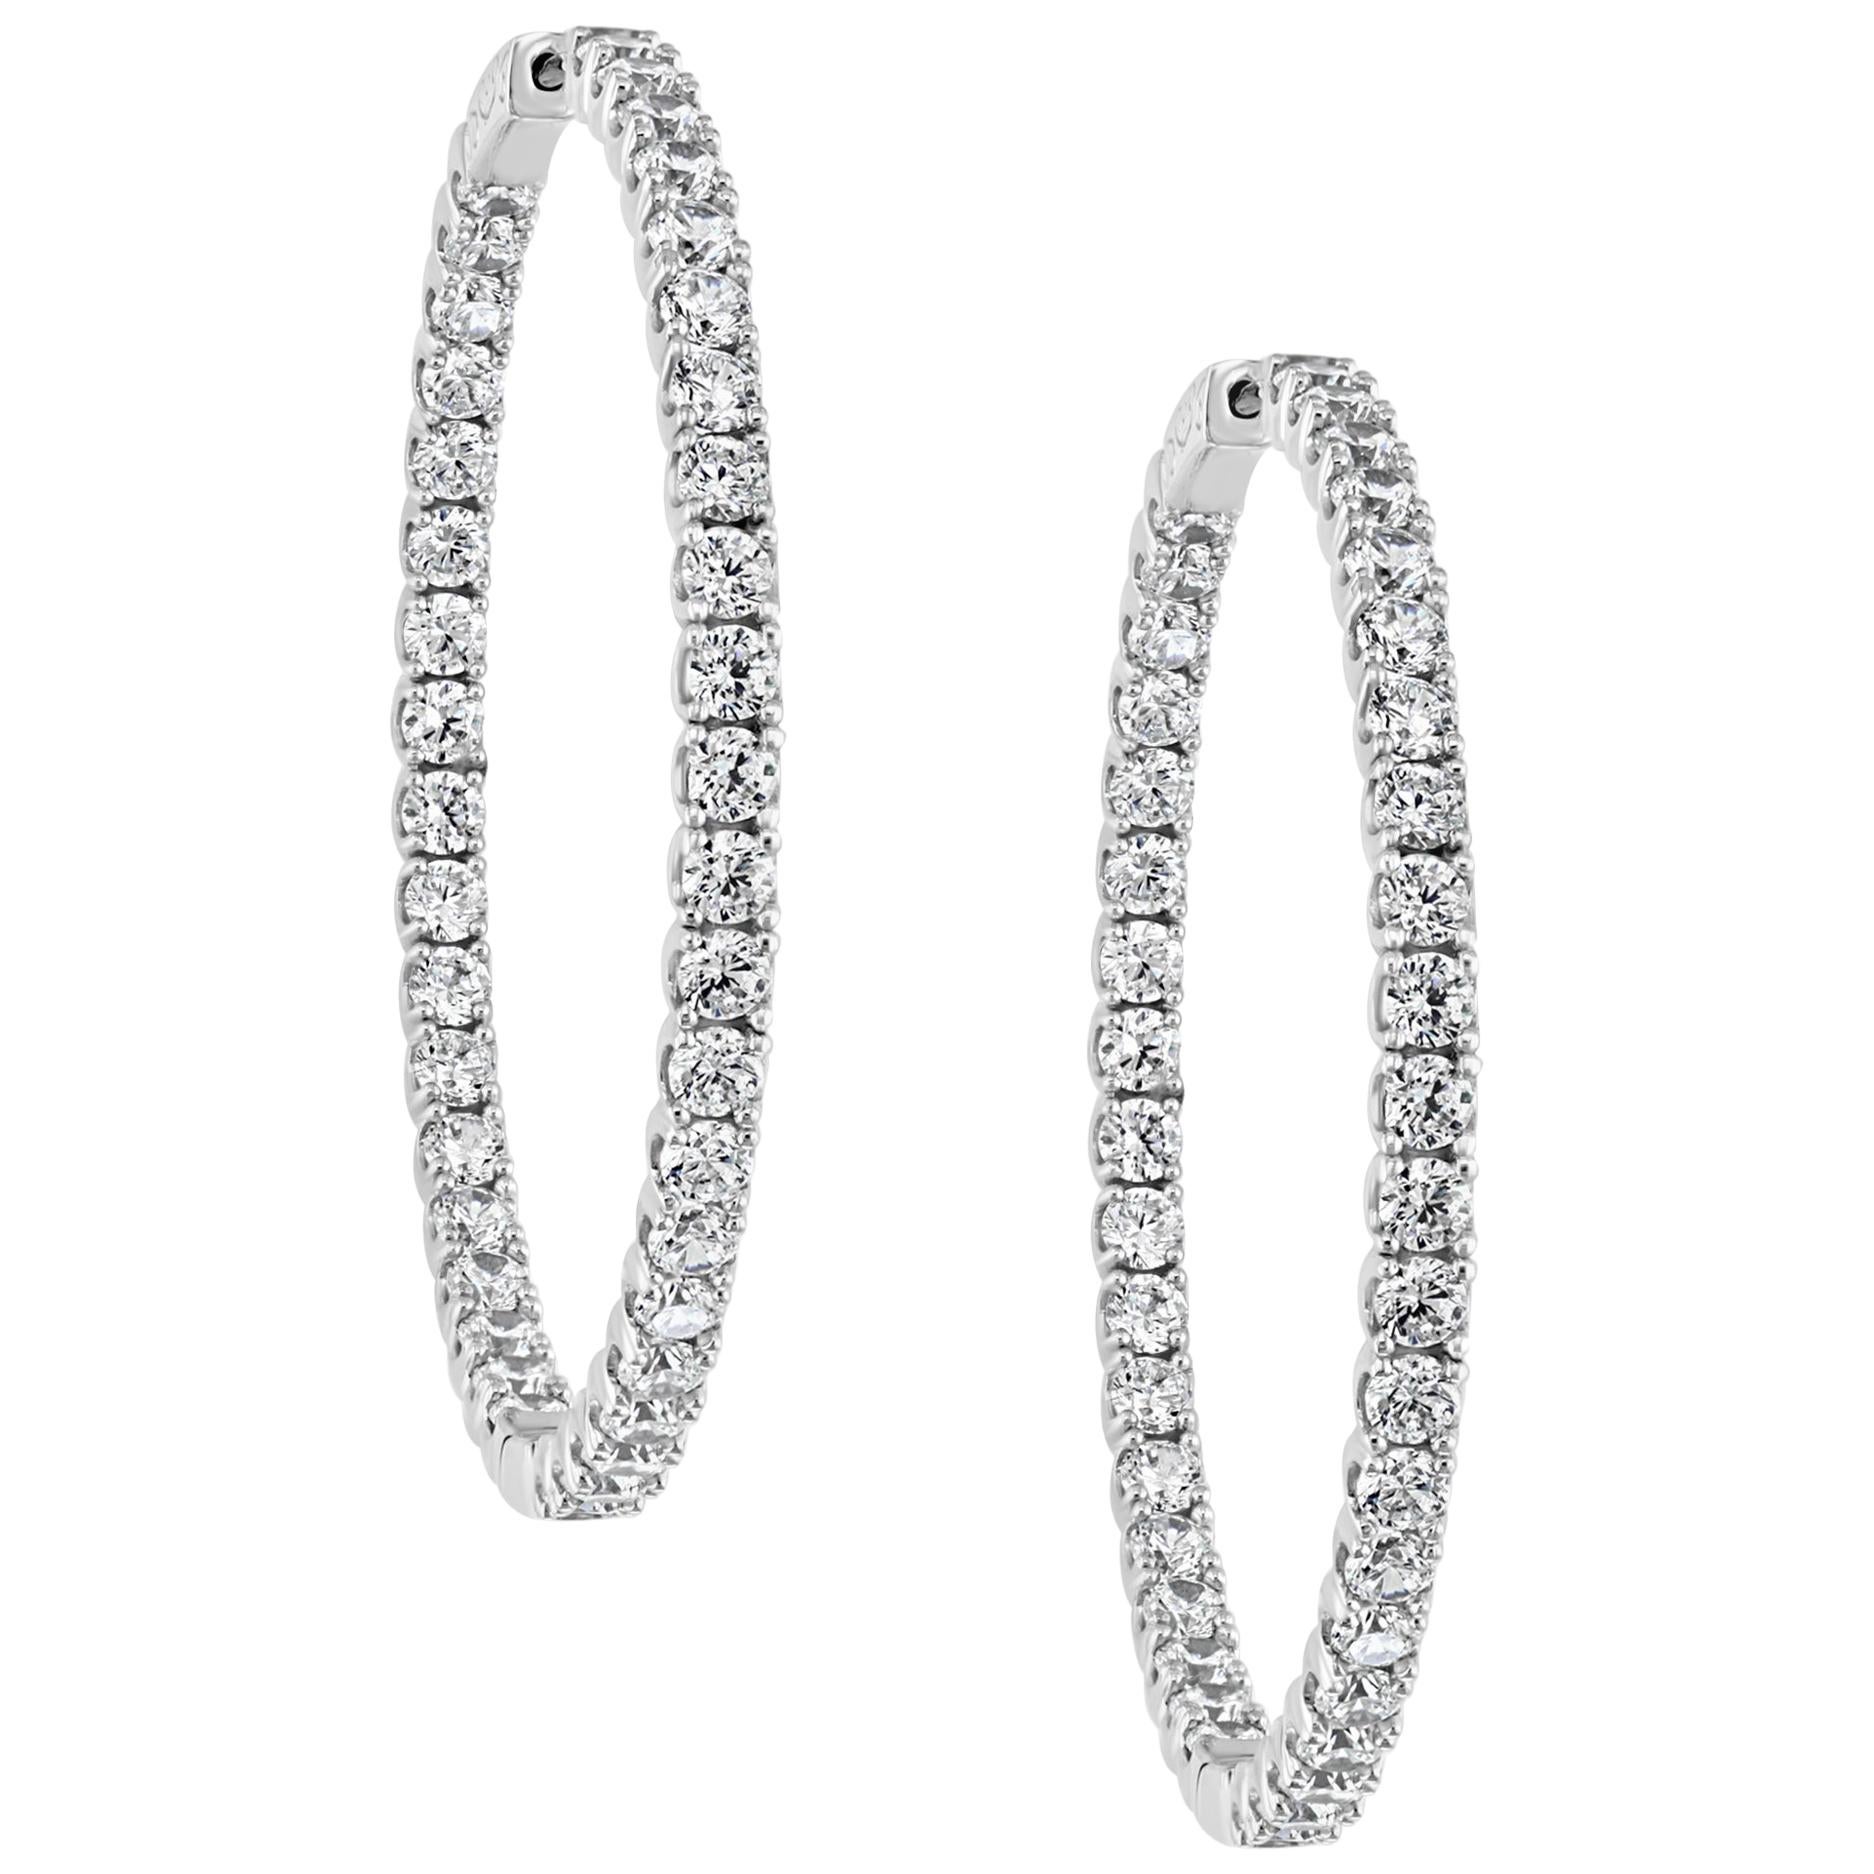 Hot Fashionable Medium Inside Out Hoops in Sterling Silver and Cubic Zirconia
Hot Fashionable Medium 1.5 MM wide  , Weight 11 gm , Inside Out Hoops in Sterling Silver And Cubic Zirconia 
Please read the review about his item from the customer who